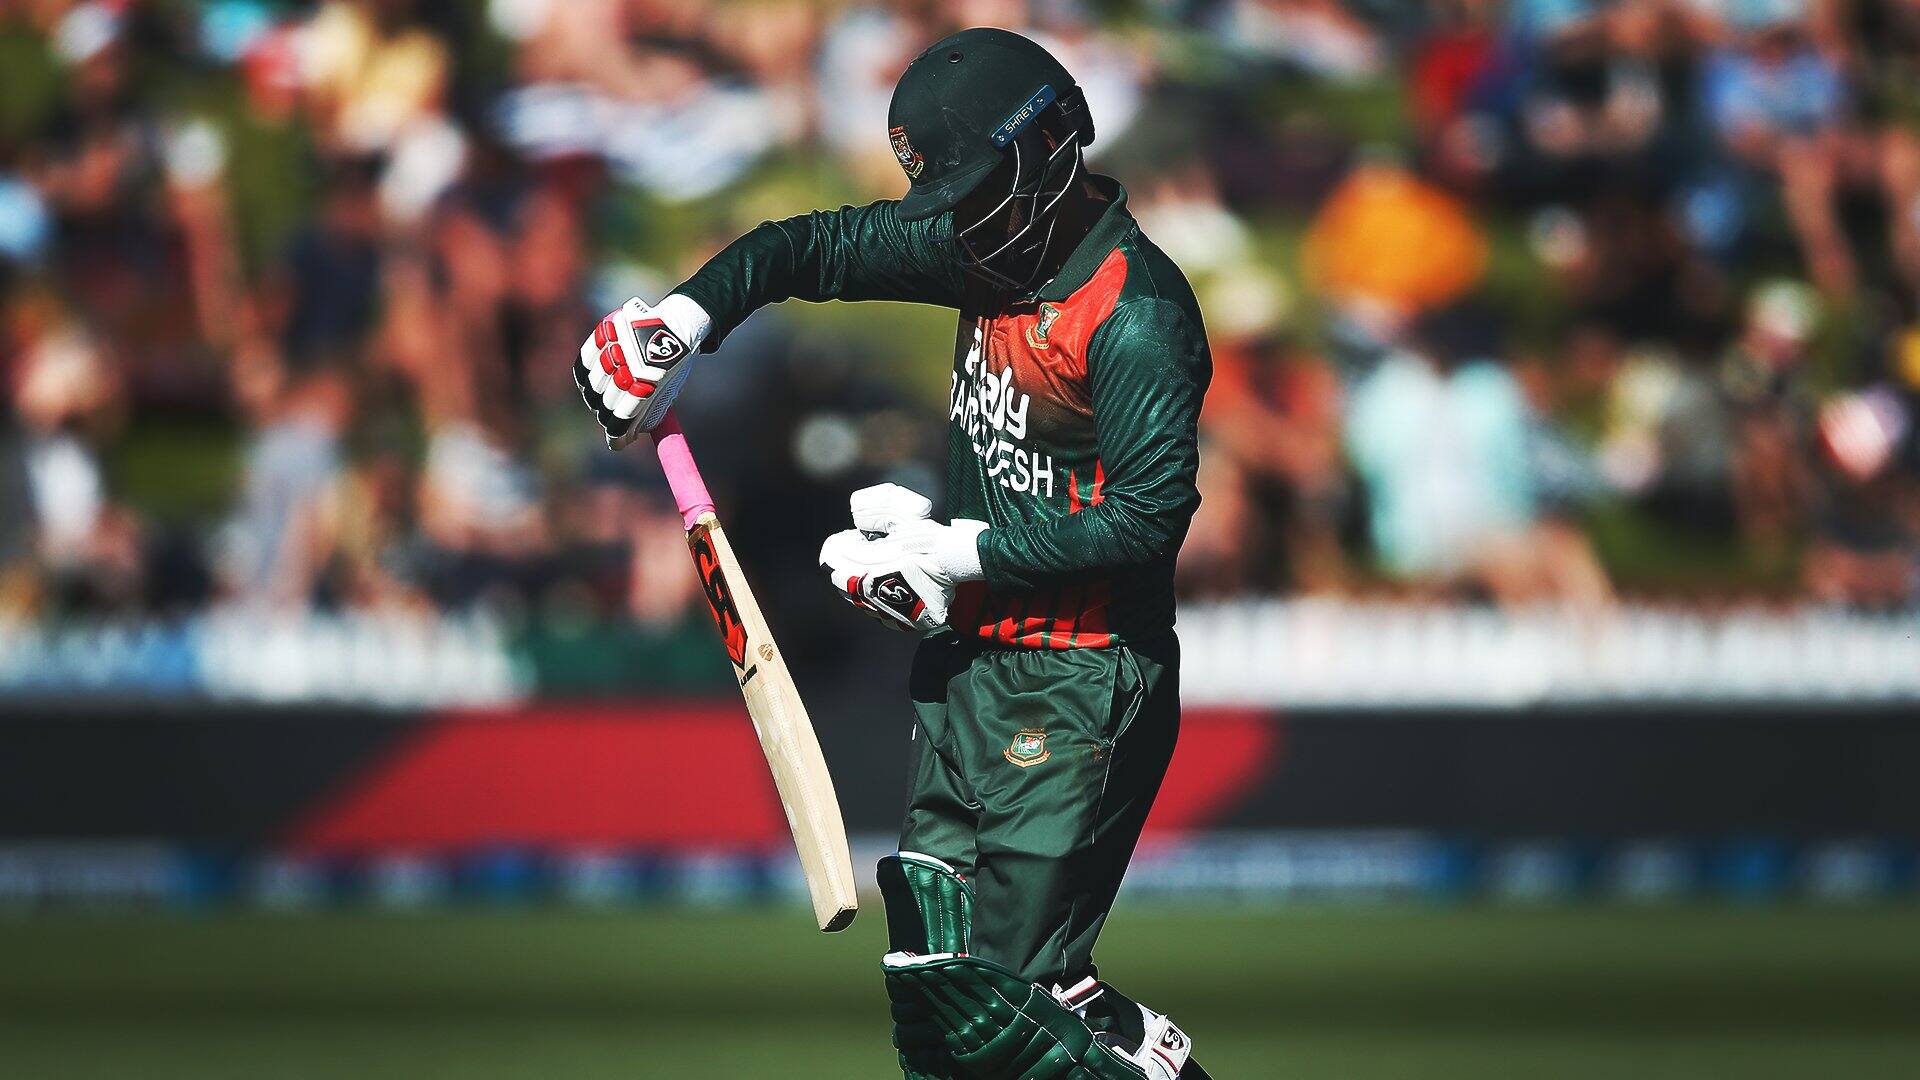 Bangladesh ODI captain Tamim Iqbal walks back after being dismissed in the third ODI against New Zealand. (Source: Twitter)